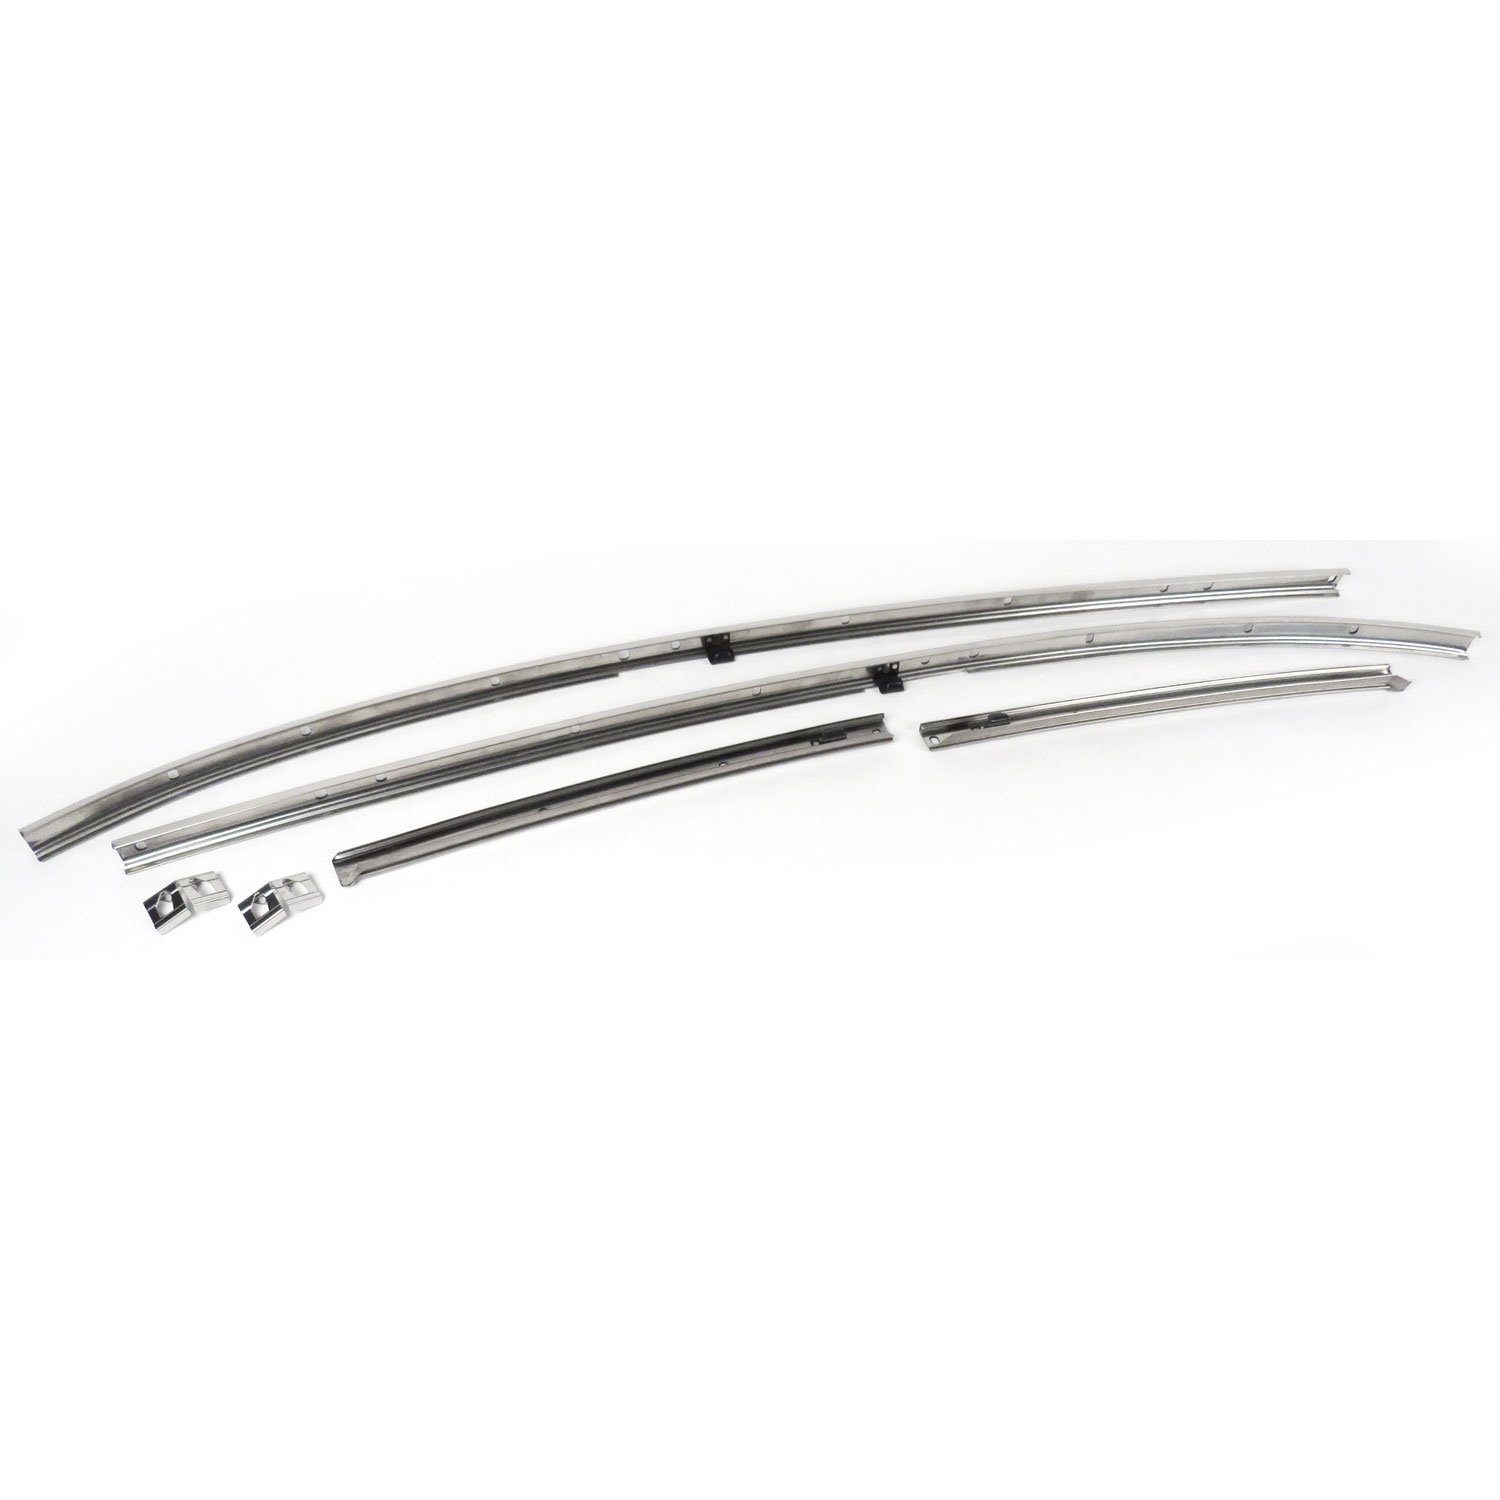 RR03-69P Roof Rail Weather Strip Channel Set 1969 Chevy Chevelle